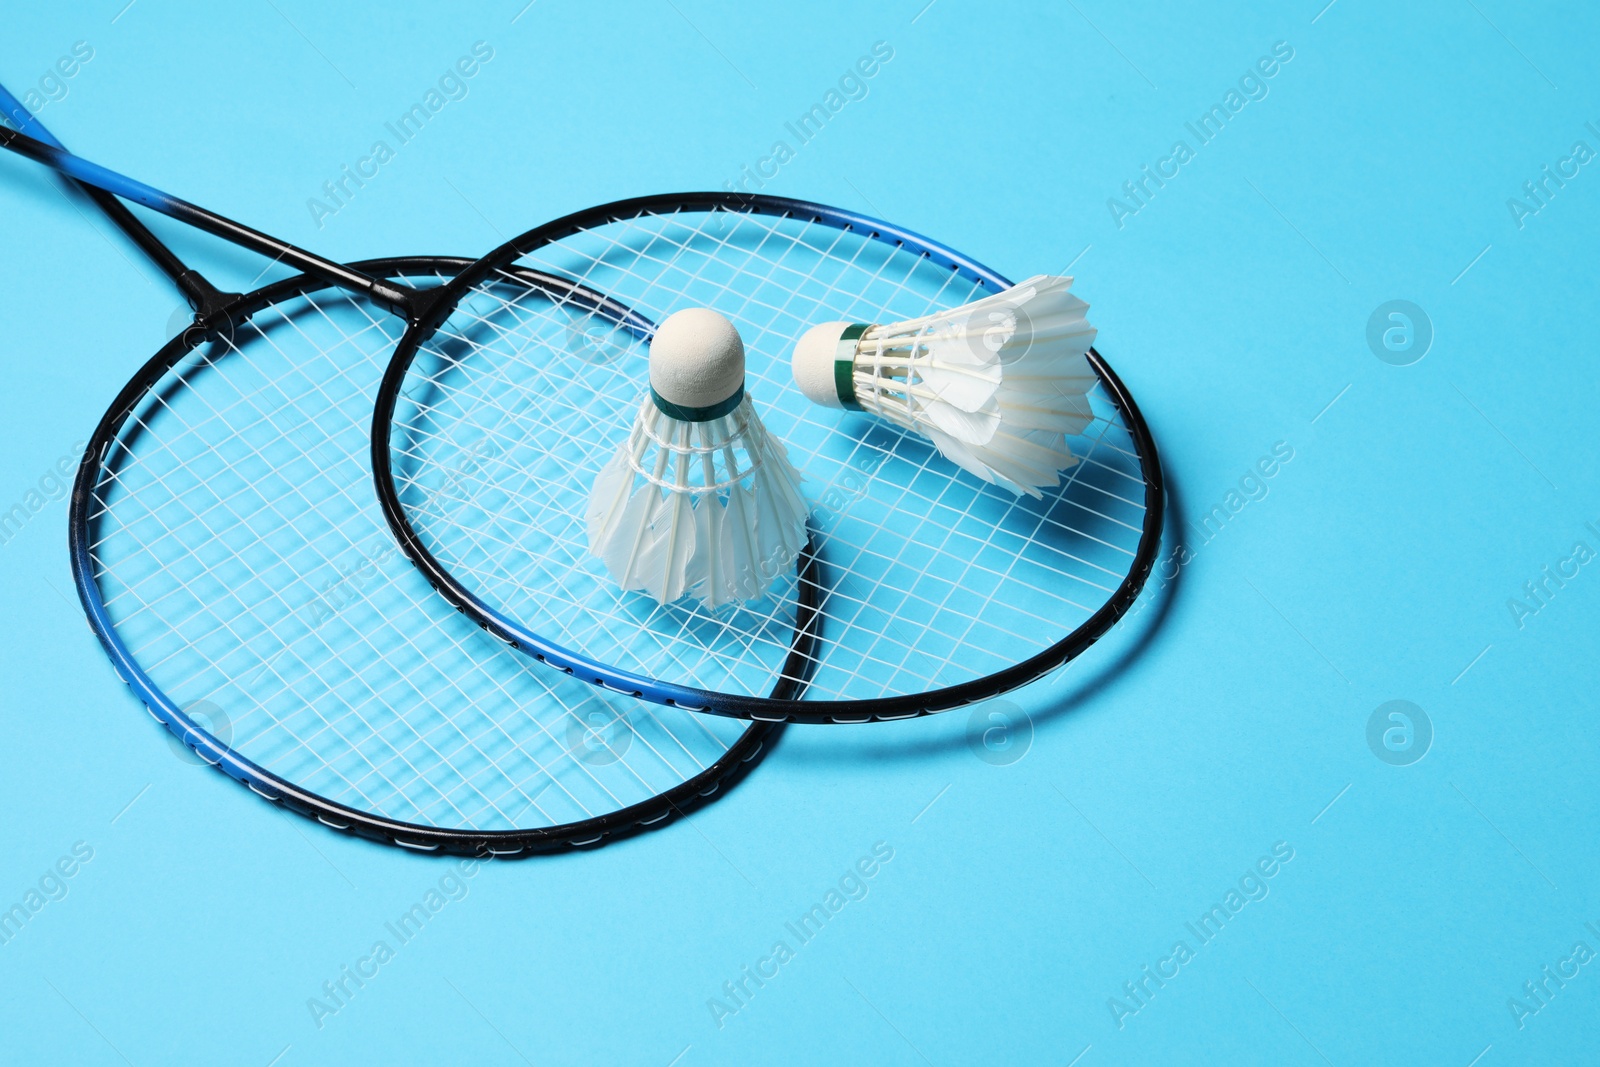 Photo of Feather badminton shuttlecocks and rackets on light blue background